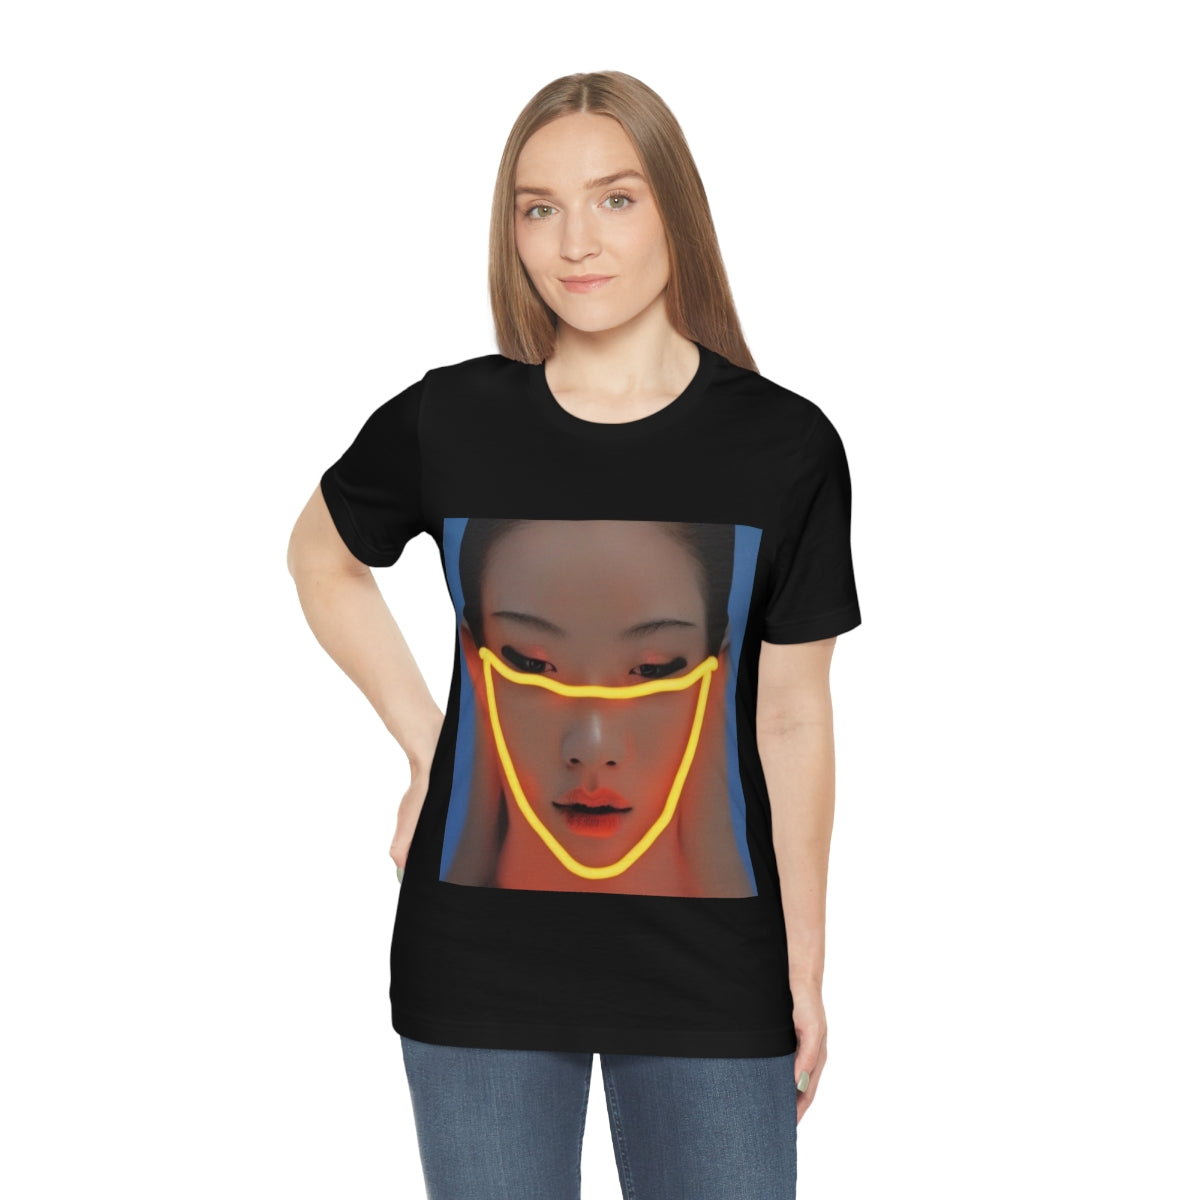 Innocently Happy_Mask Our Emotions T-Shirt Collection - DSIV